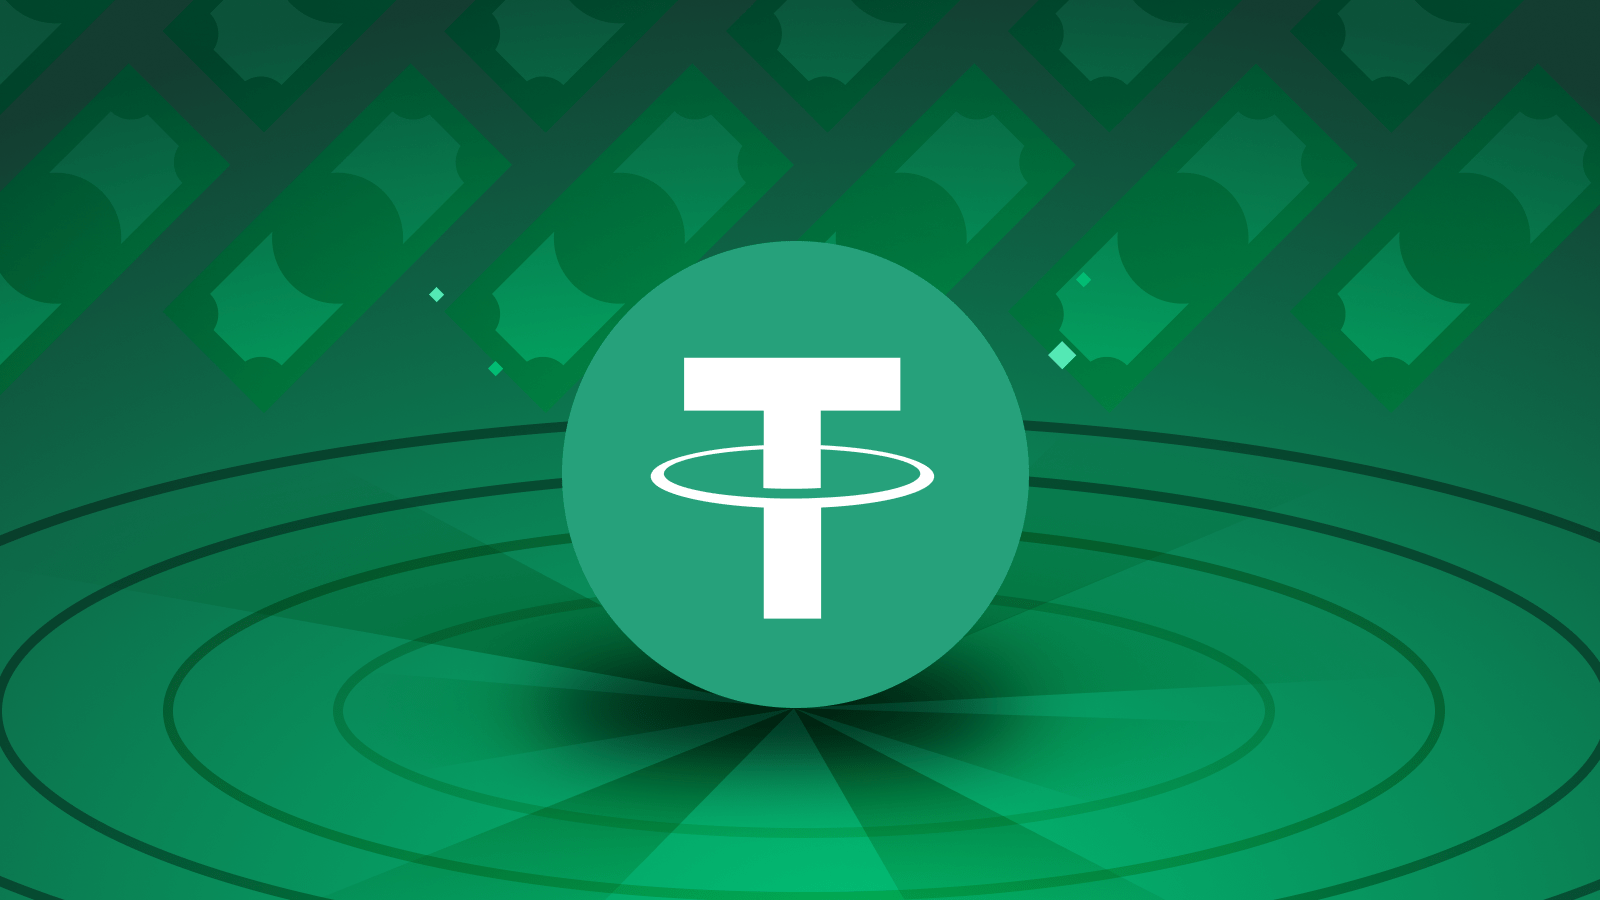 Tether boasts of its financial stability after strong profits, money moved out of banks